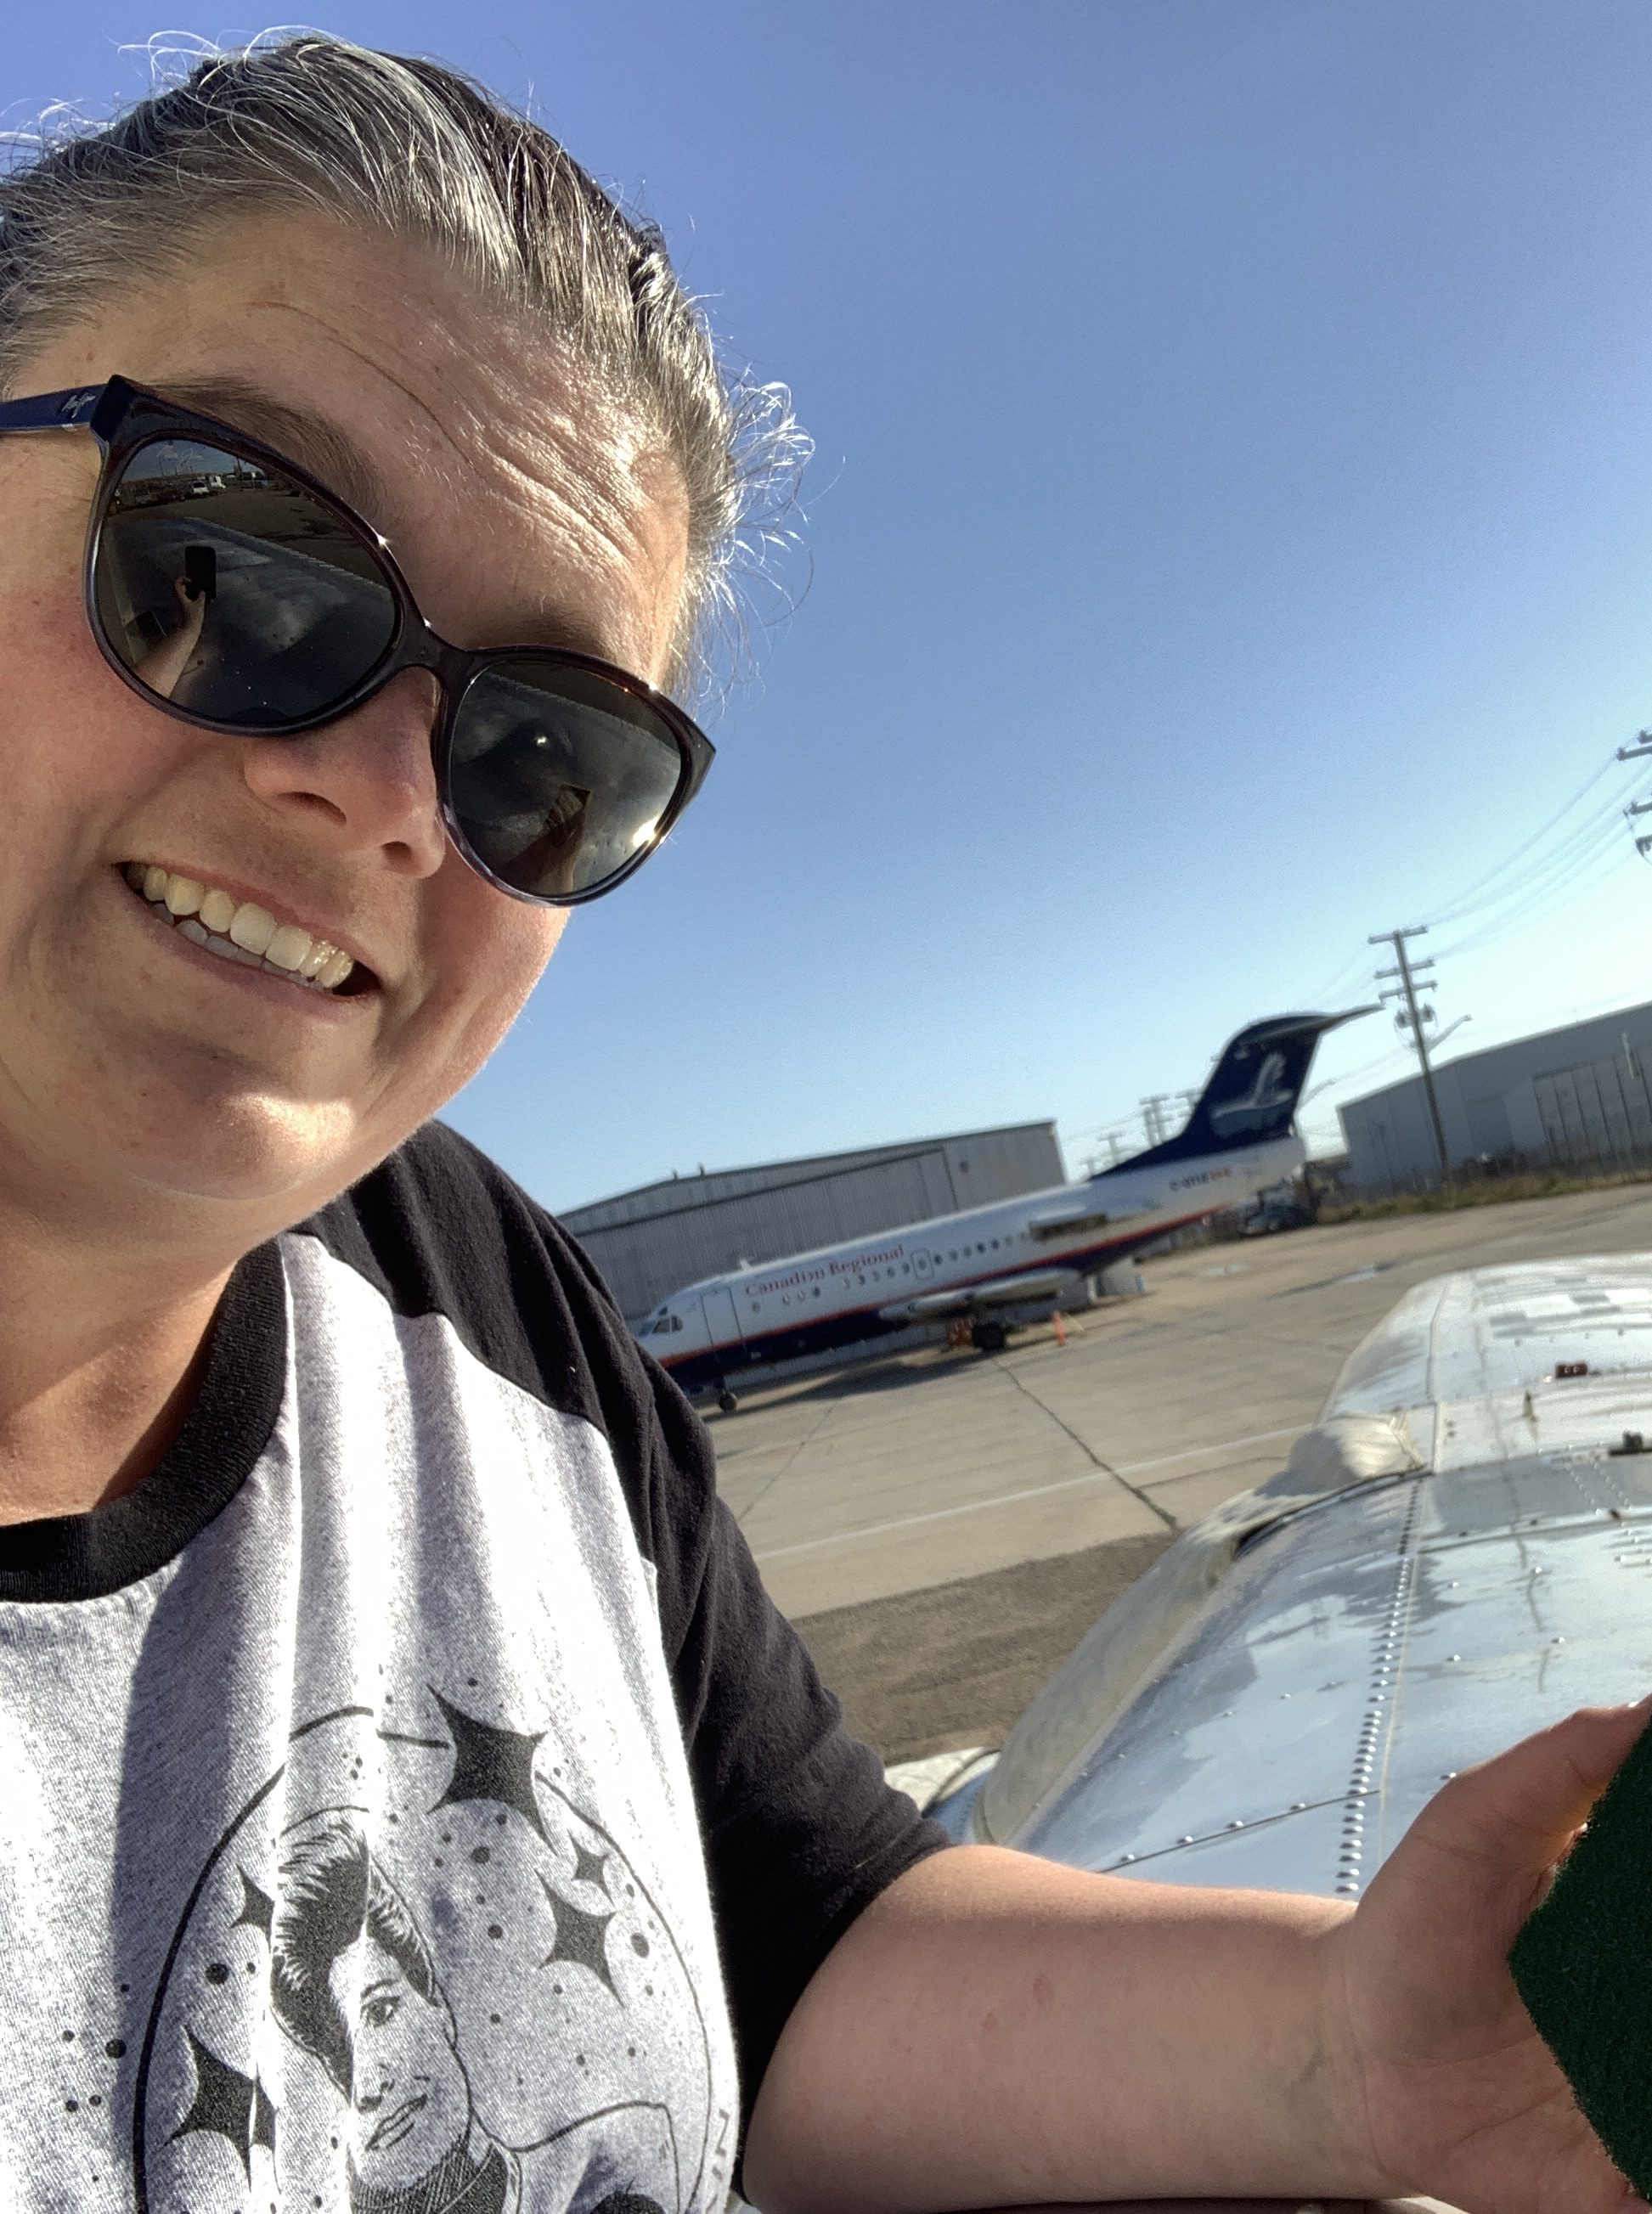 A picture of Desirae, a female with her hair pulled back, wearing sunglasses and a grey shirt with a black design on it and black sleeves. The person is leaning on the top of a high-wing airplane polishing the aluminum. The background is of a blue sky with a large commercial airplane in front of a storage hangar in the distance.